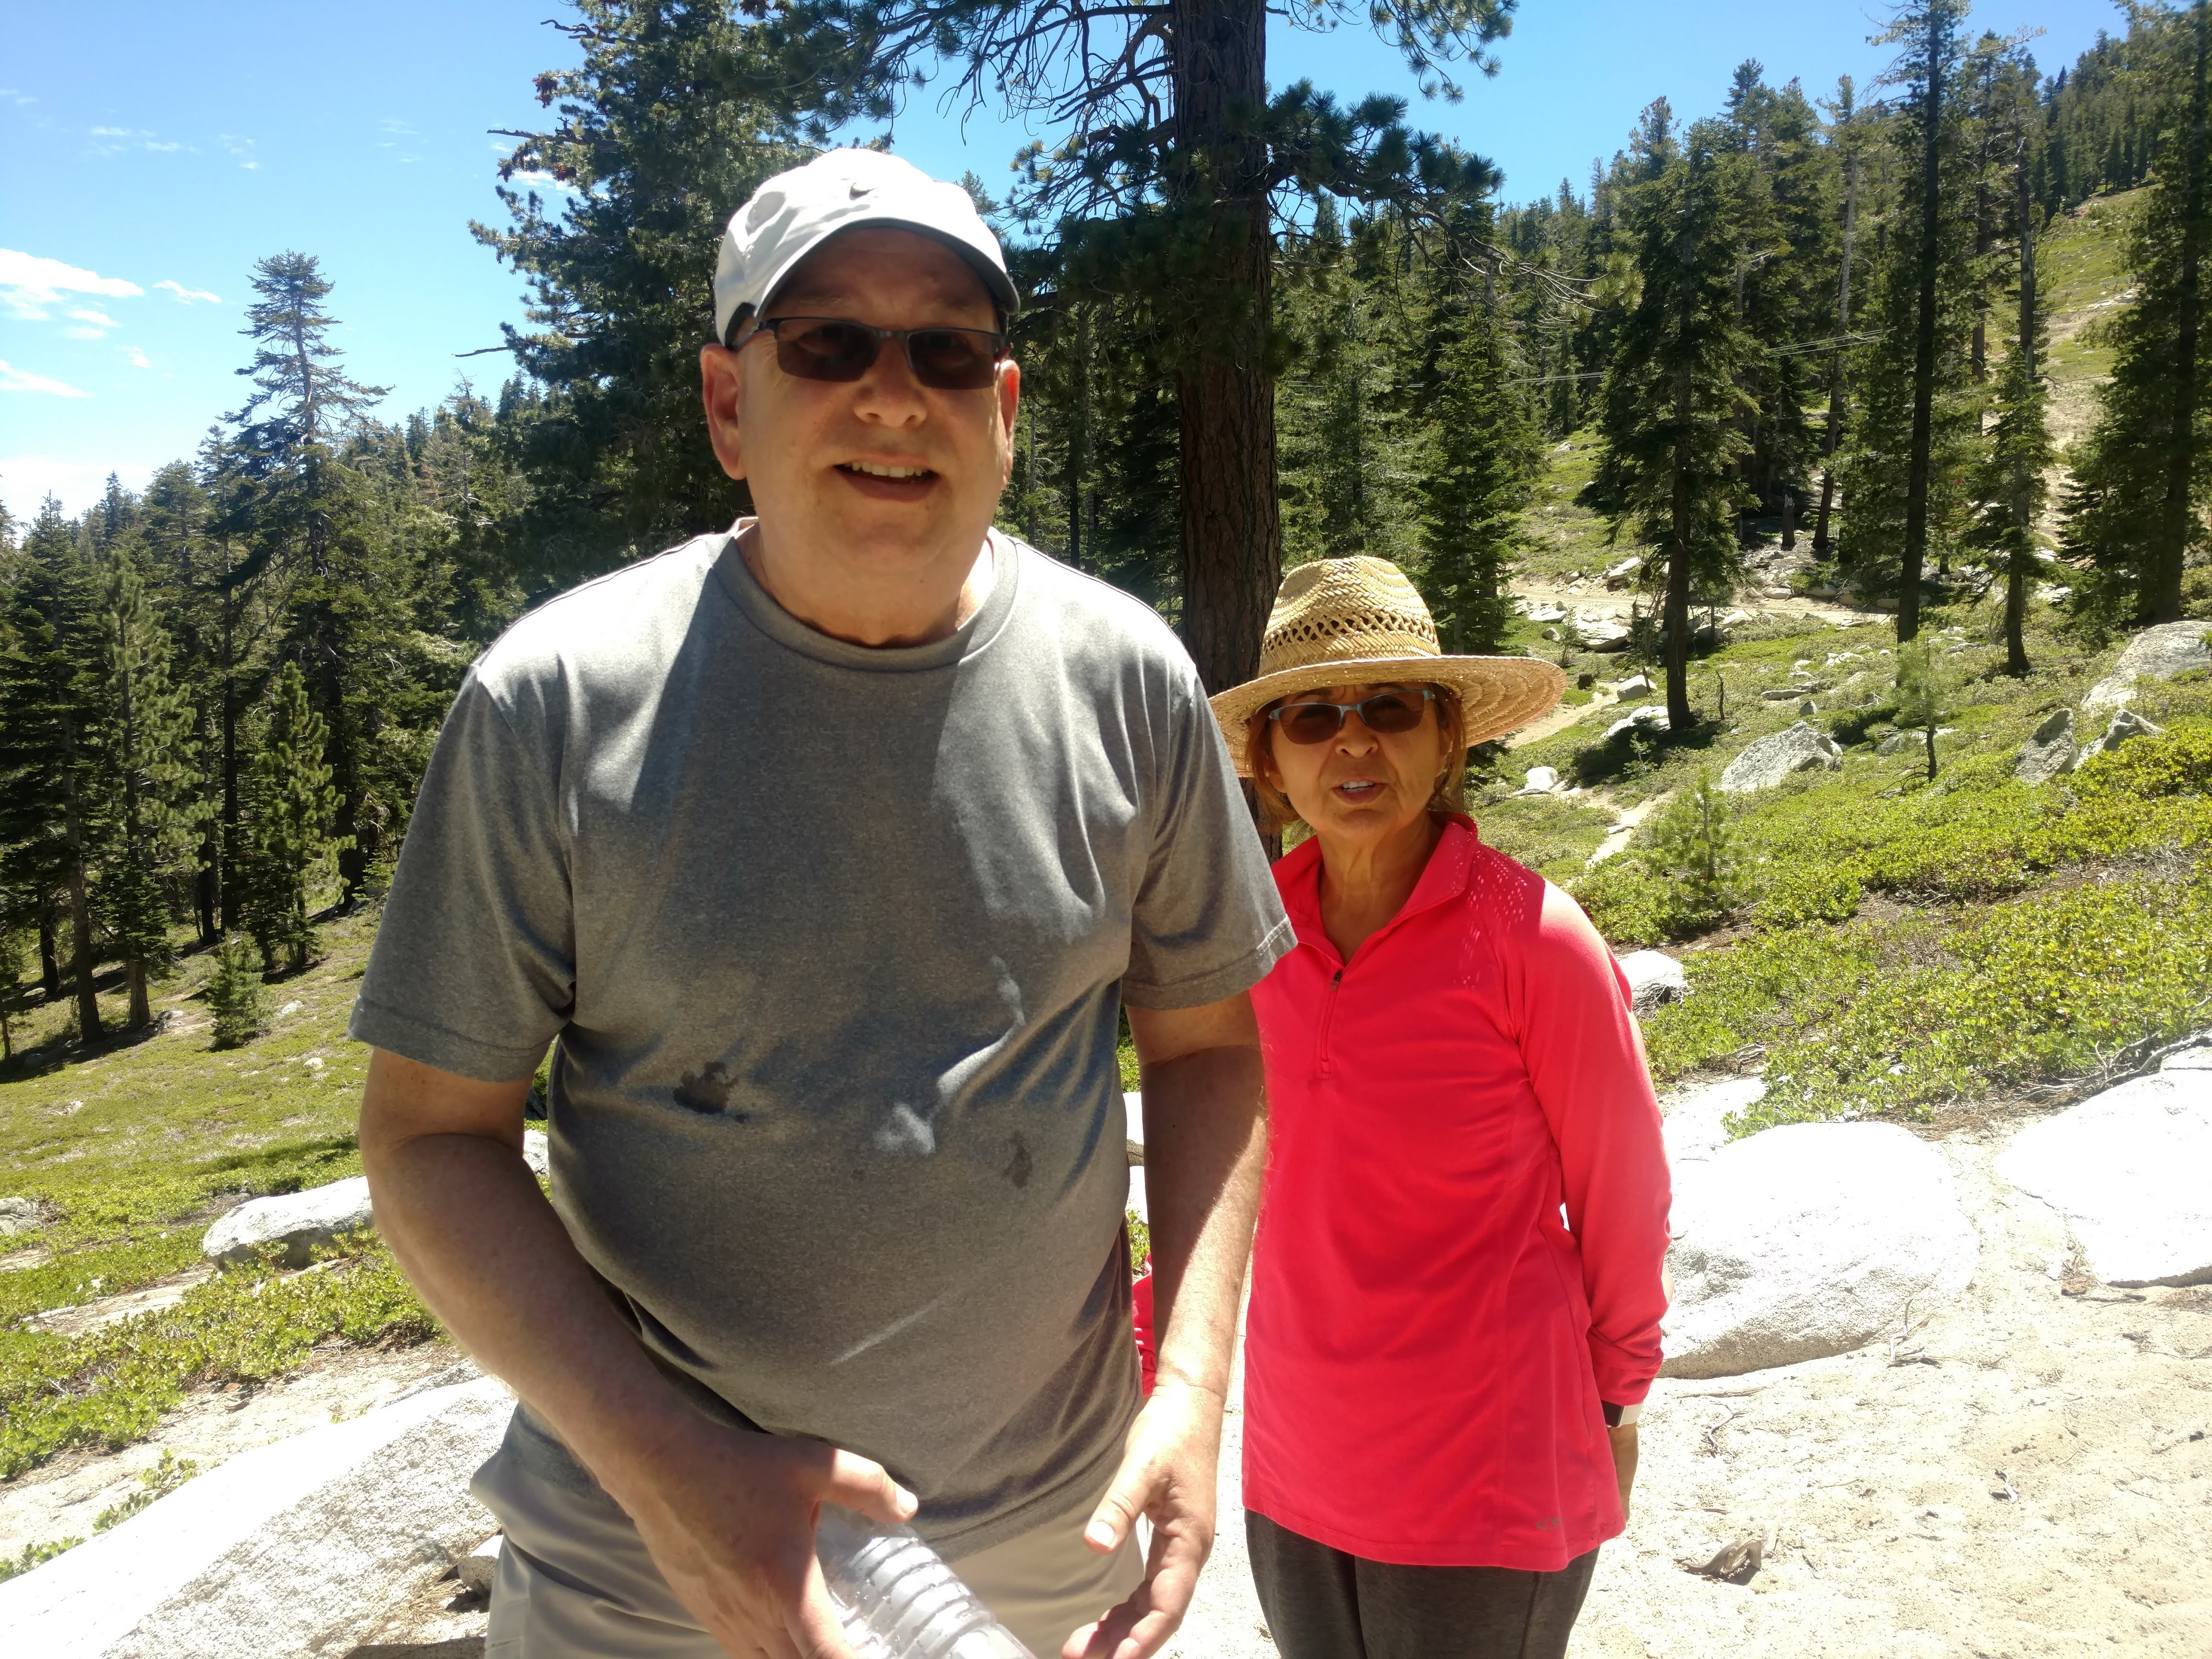 2023 February 13 - Weekly Q and A - Darryl Horowitt - Photo - Hiking with EMH